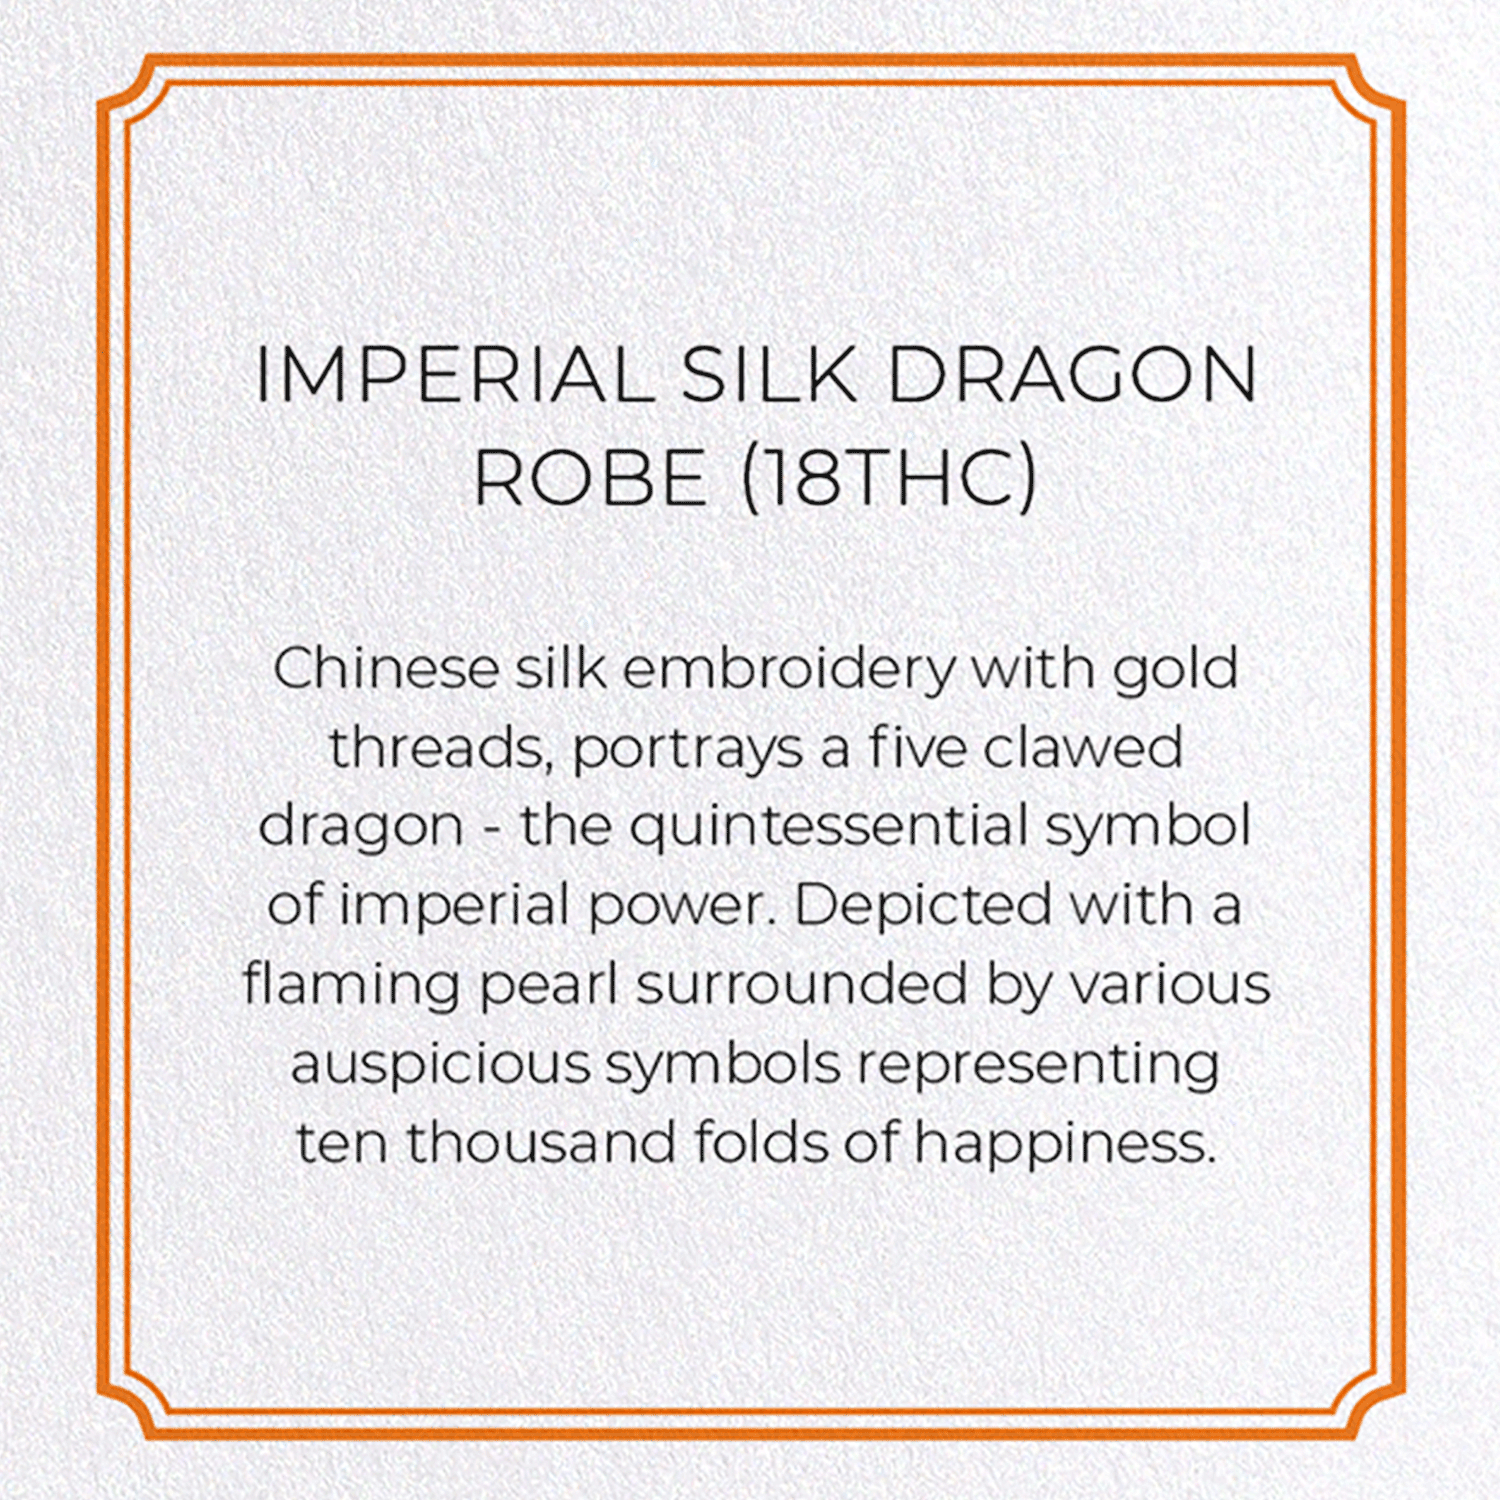 IMPERIAL SILK DRAGON ROBE (18THC): Painting Greeting Card